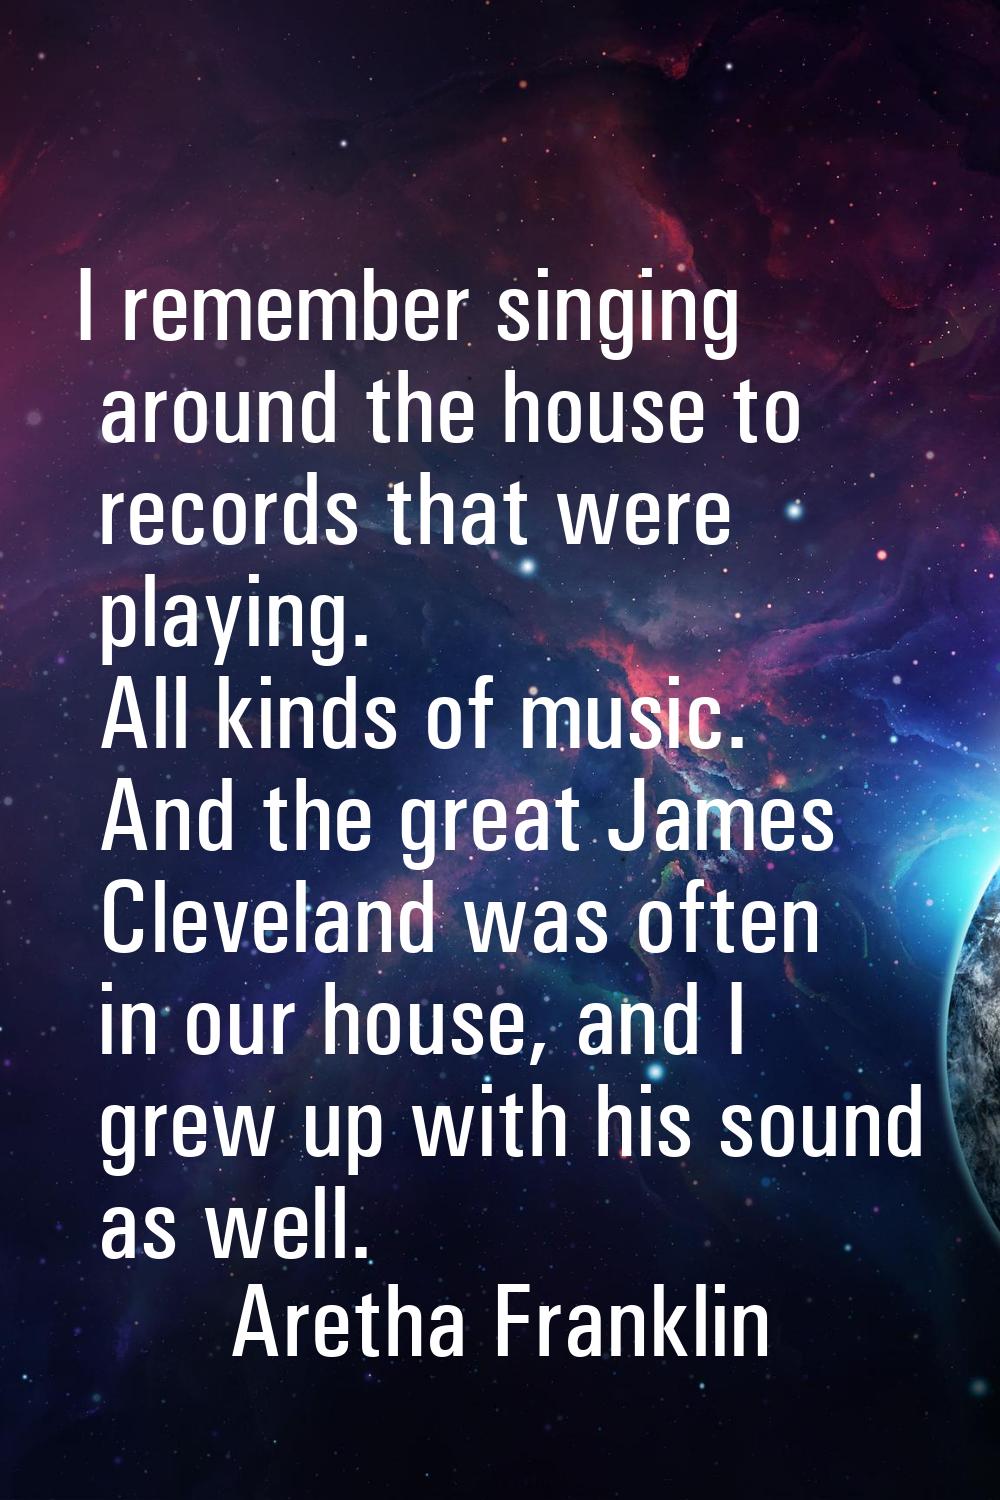 I remember singing around the house to records that were playing. All kinds of music. And the great